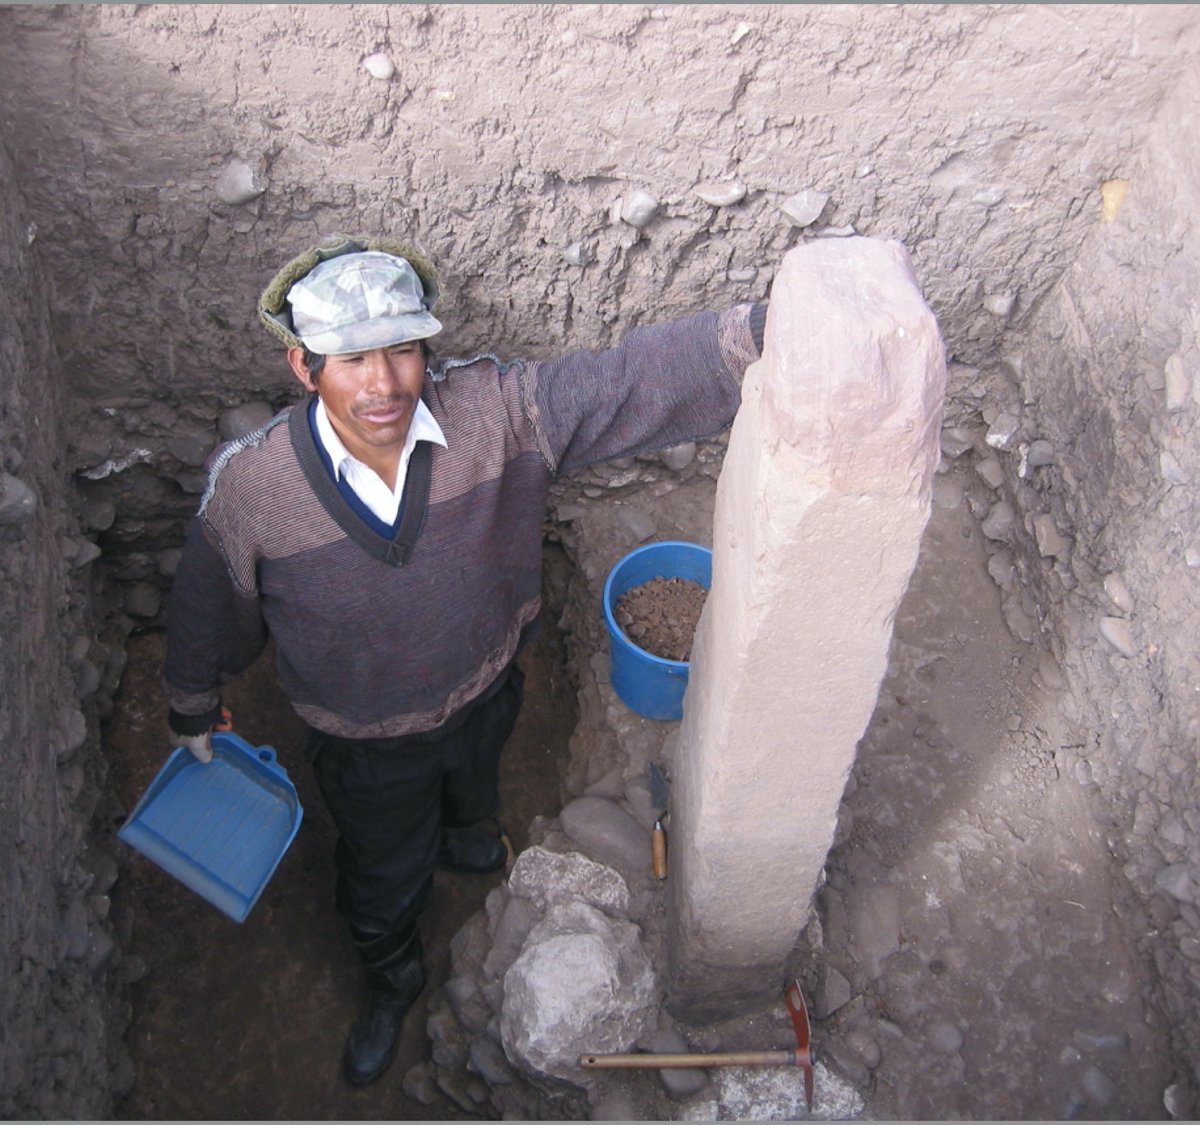 I have worked my Bolivian colleagues excavating and visiting many of the monoliths across the Bolivian and Peruvian highlands. Here is a red sandstone monolith we excavated in a sunken court in 2003. This dated to the 8th C BC, and like many of this period lacked carving (2/25)